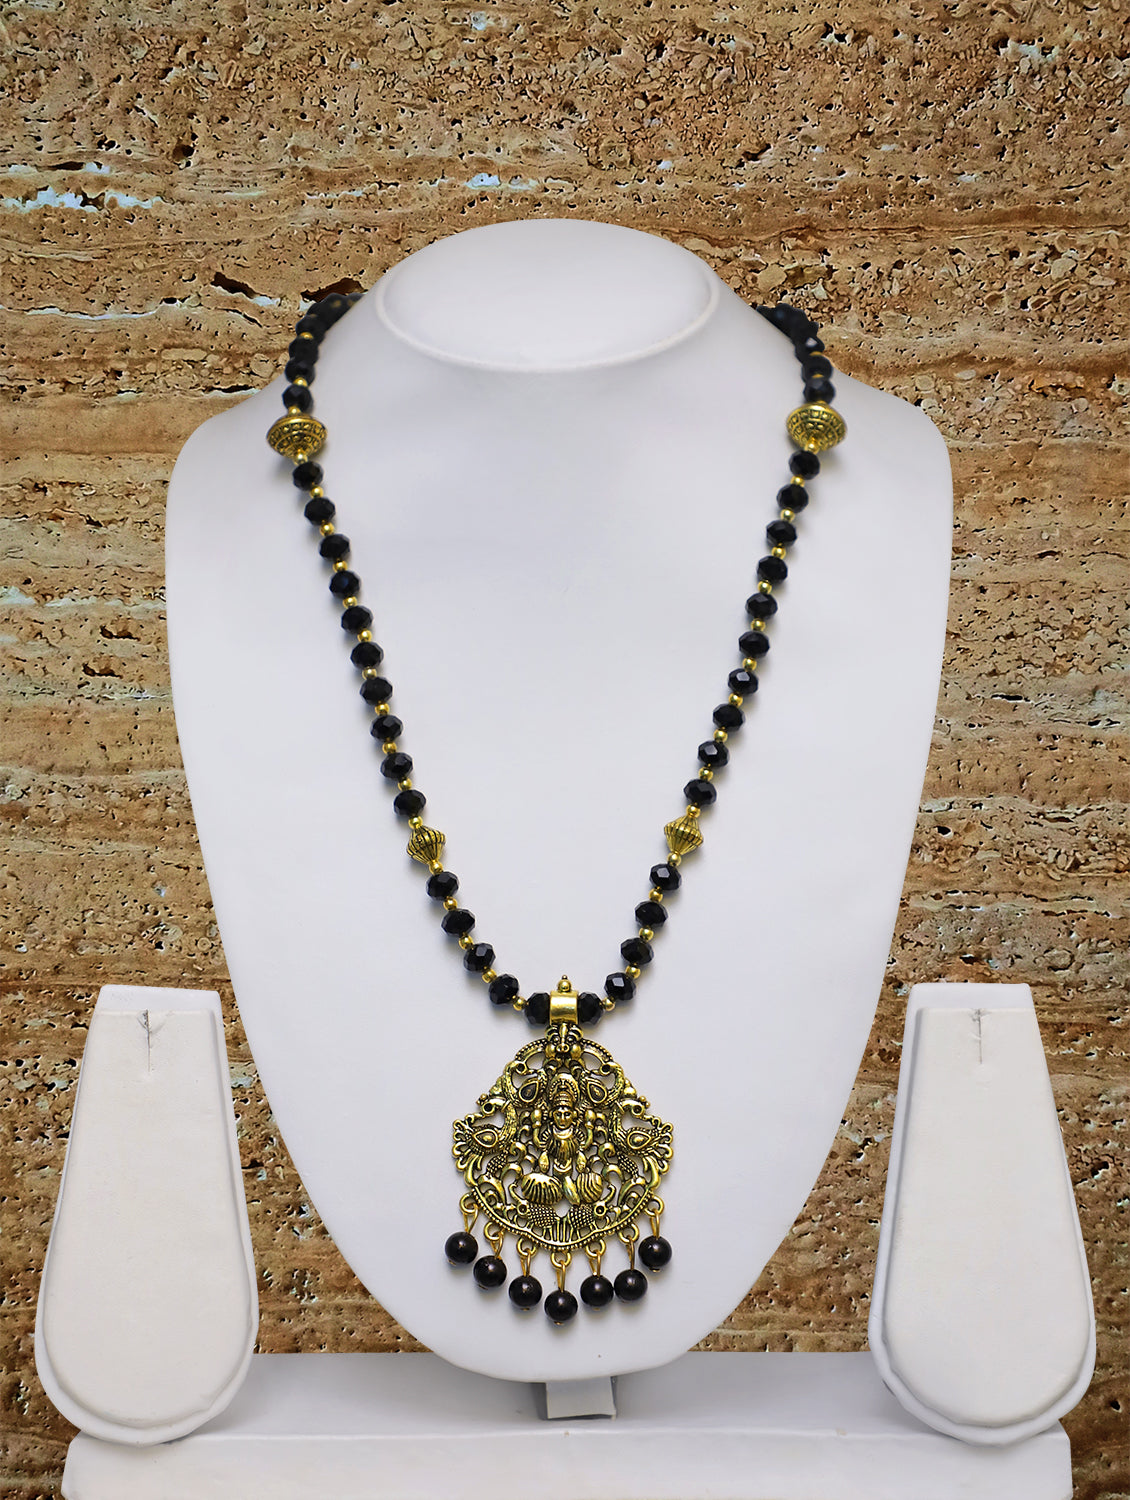 Digital Dress Room Long Mangalsutra Designs Gold Plated Latest Big Crystal Black Beads Chain Laxmi Pendant Oxidized 28 Inches Mangalsutra